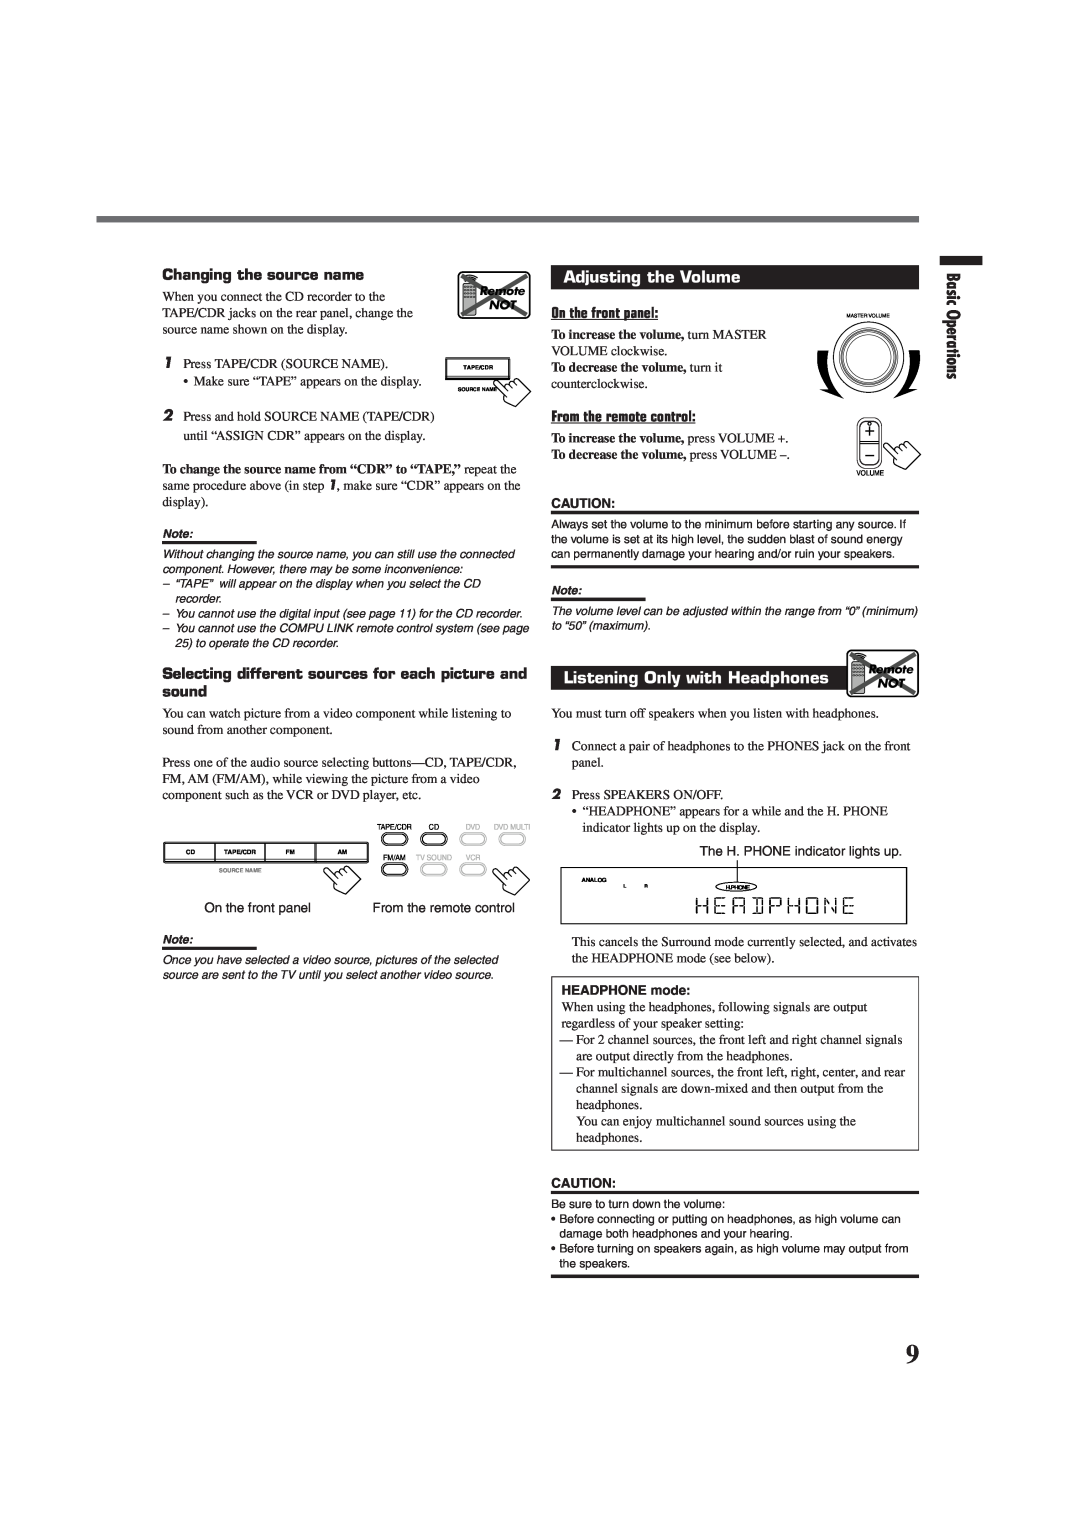 JVC RX-6020VBK manual Basic Operations, Adjusting the Volume, Listening Only with Headphones, Changing the source name 